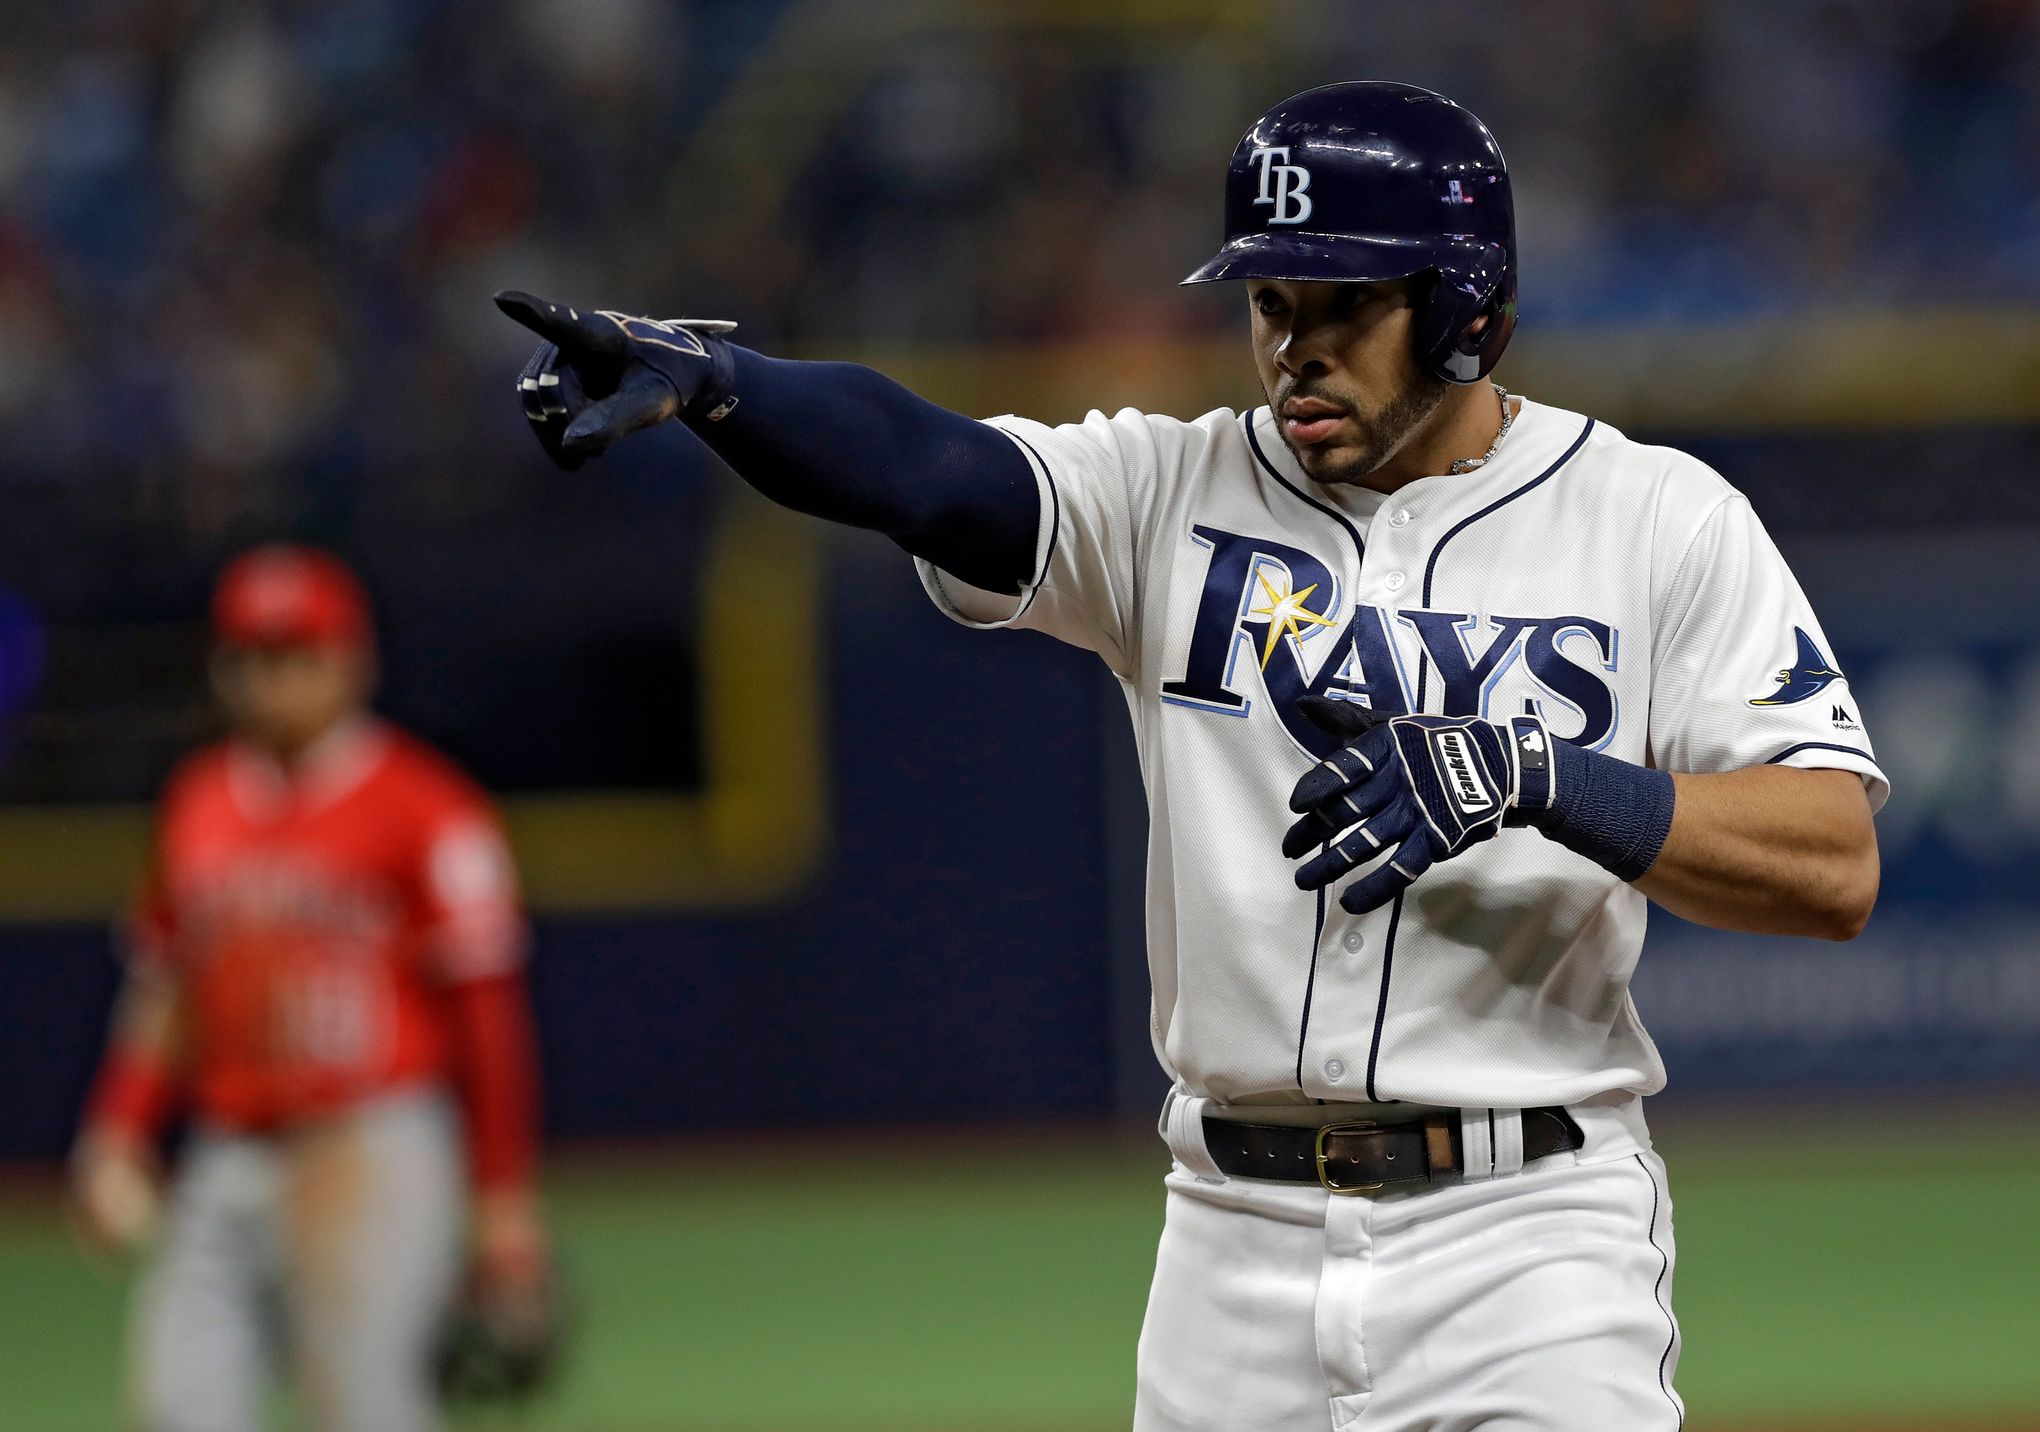 Tampa Bay Rays' Tommy Pham scores on a double by New York Yankees